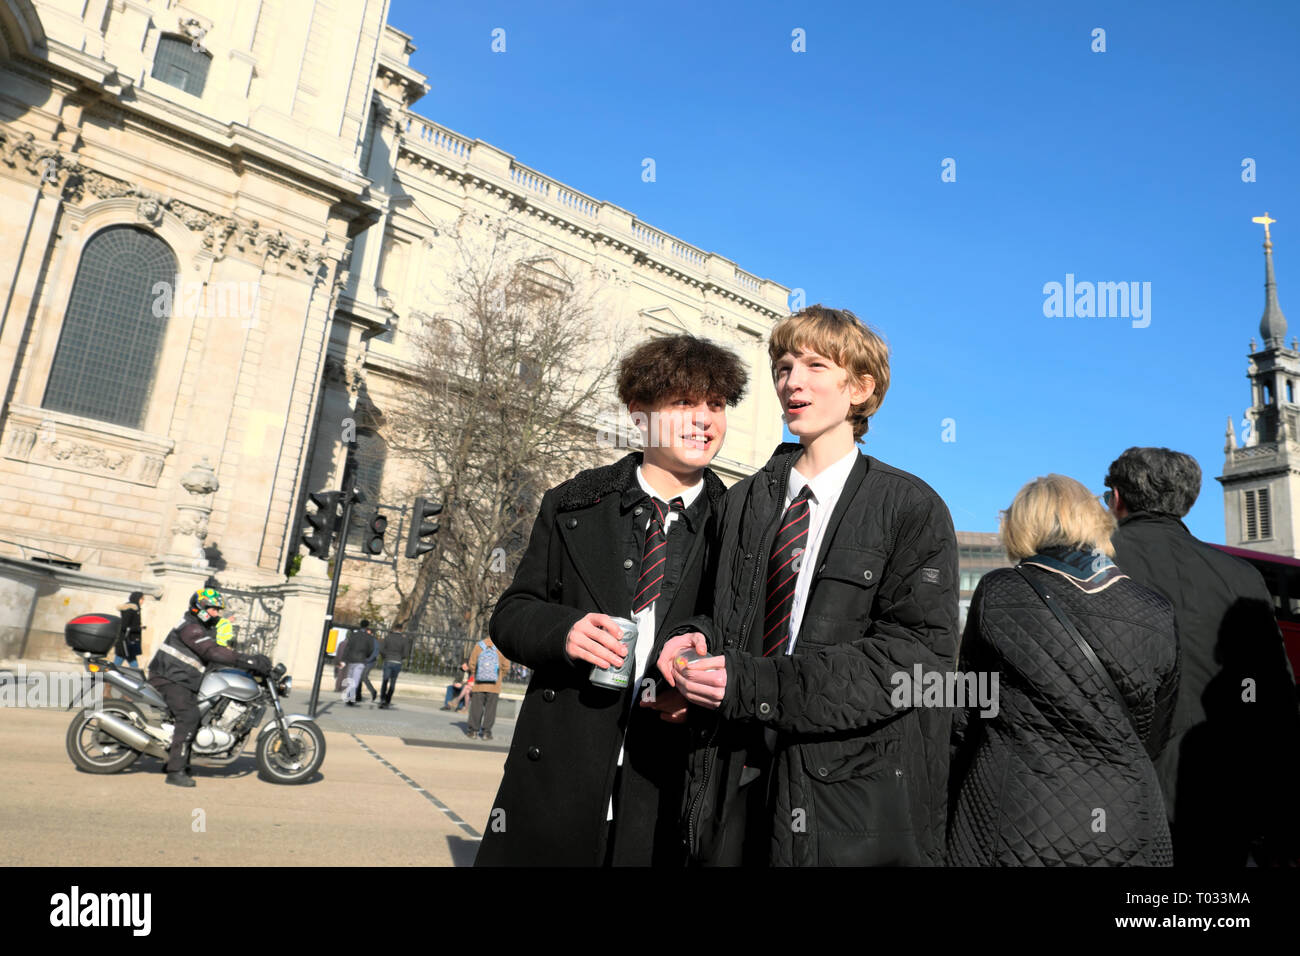 City of London school boys pupils students in winter coats and school uniform at lunchtime near St Pauls Cathedral in London England UK  KATHY DEWITT Stock Photo